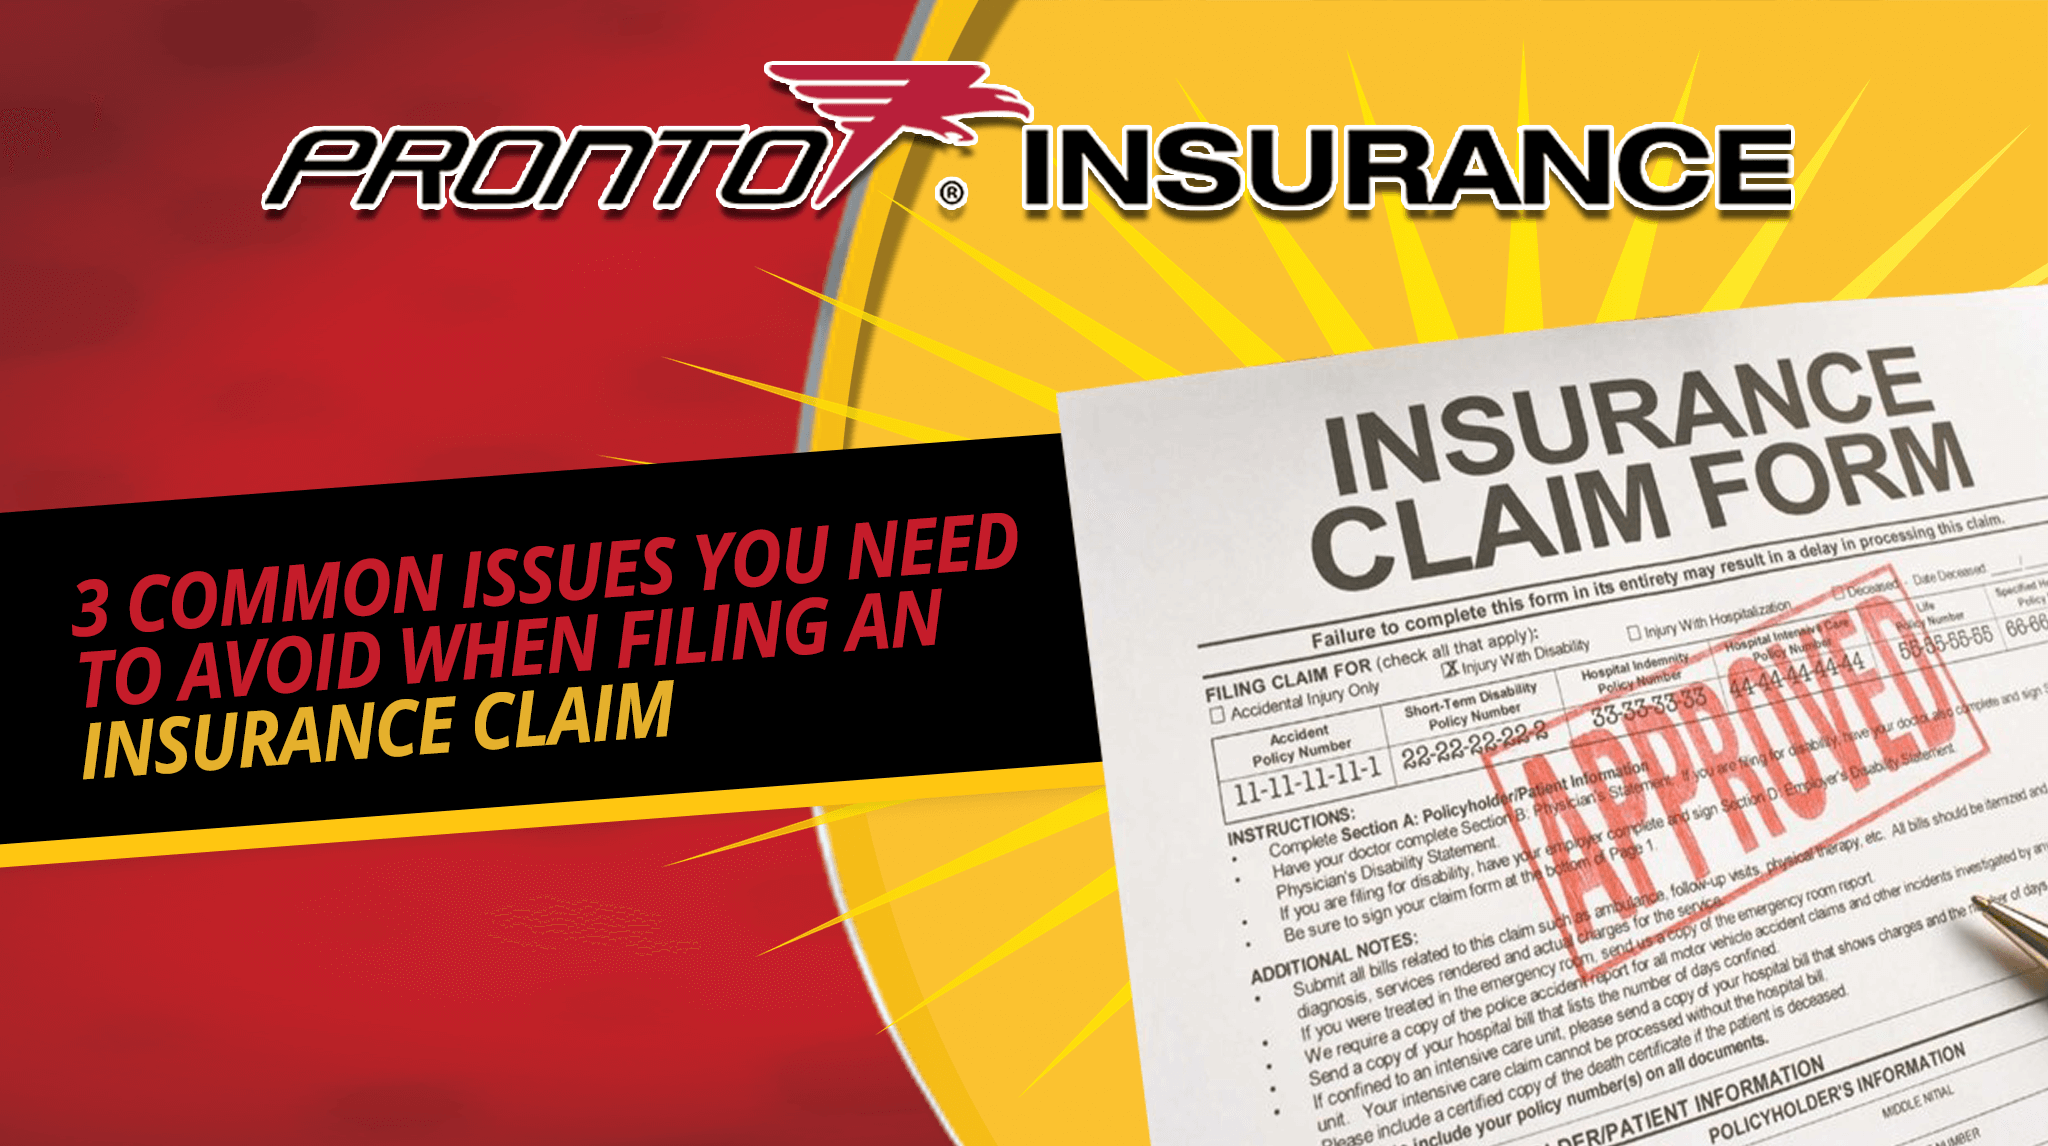 3 Common Issues You Need to Avoid When Filing an Insurance Claim